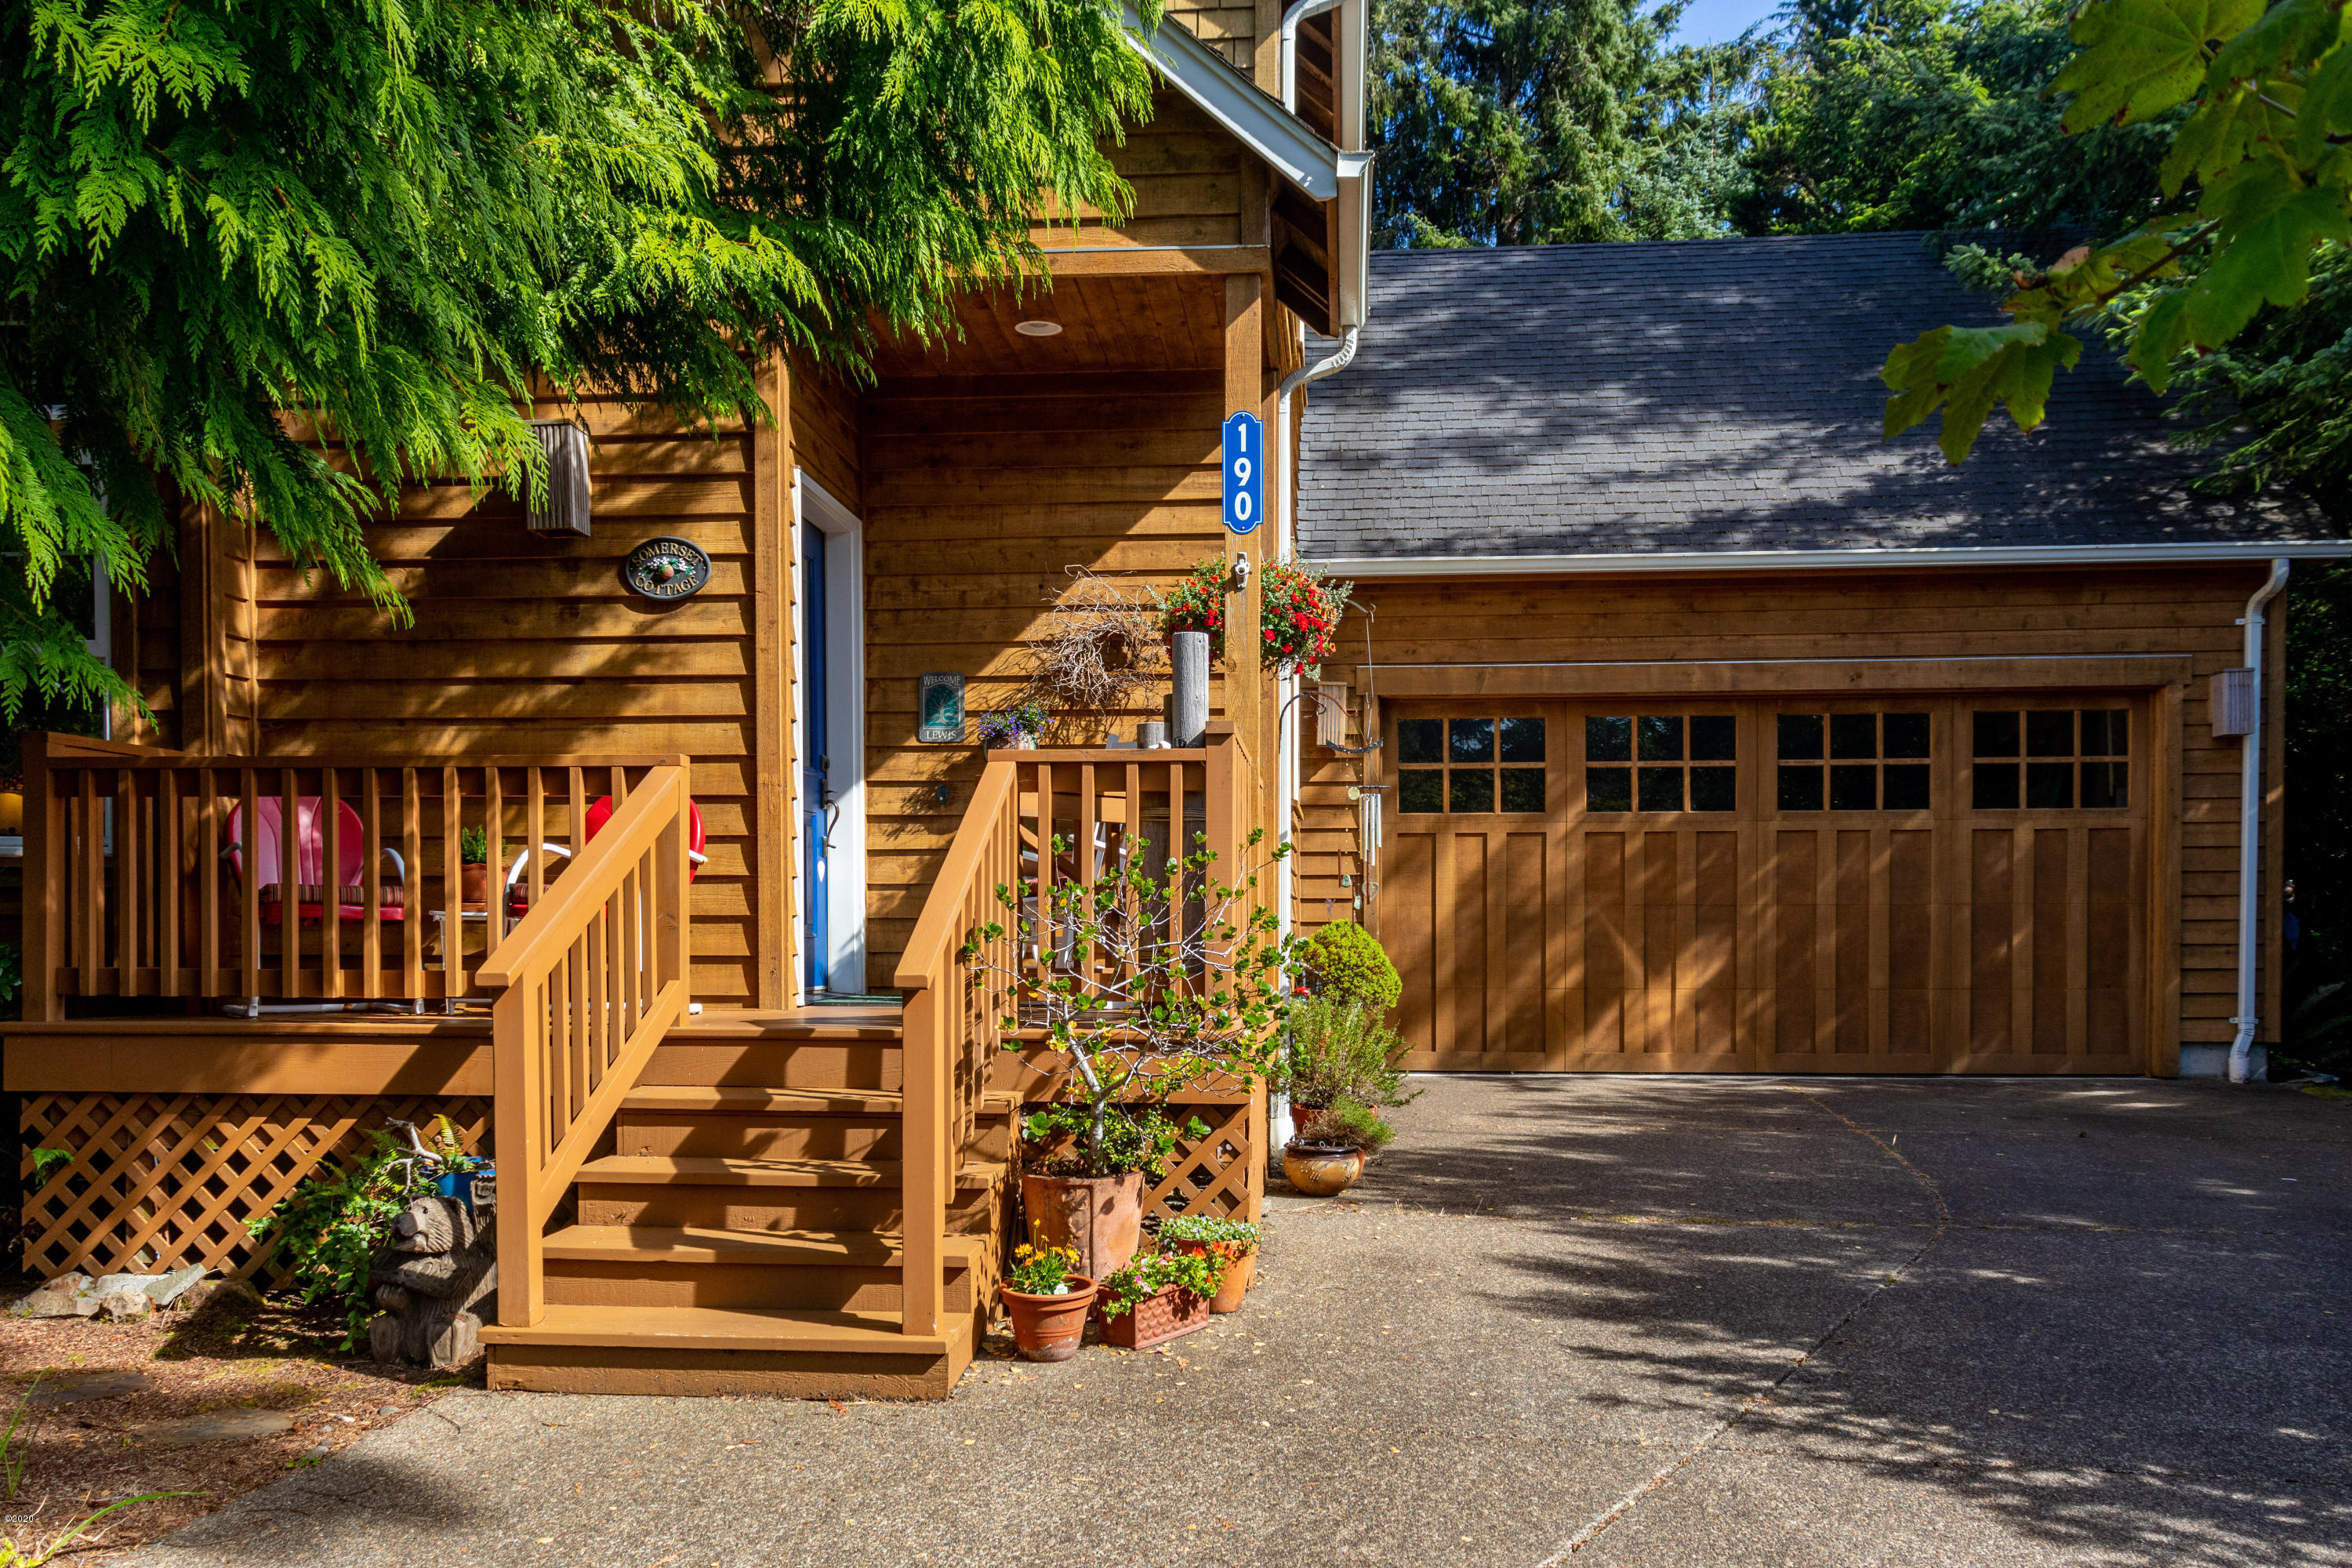 190 SW Shining Mist Depoe Bay, Gleneden Beach, Lincoln City, Newport, Otis, Rose Lodge, Seal Rock, Waldport, Yachats, To Home Listings - Amy Plechaty, Emerald Coast Realty Real Estate, homes for sale, property for sale